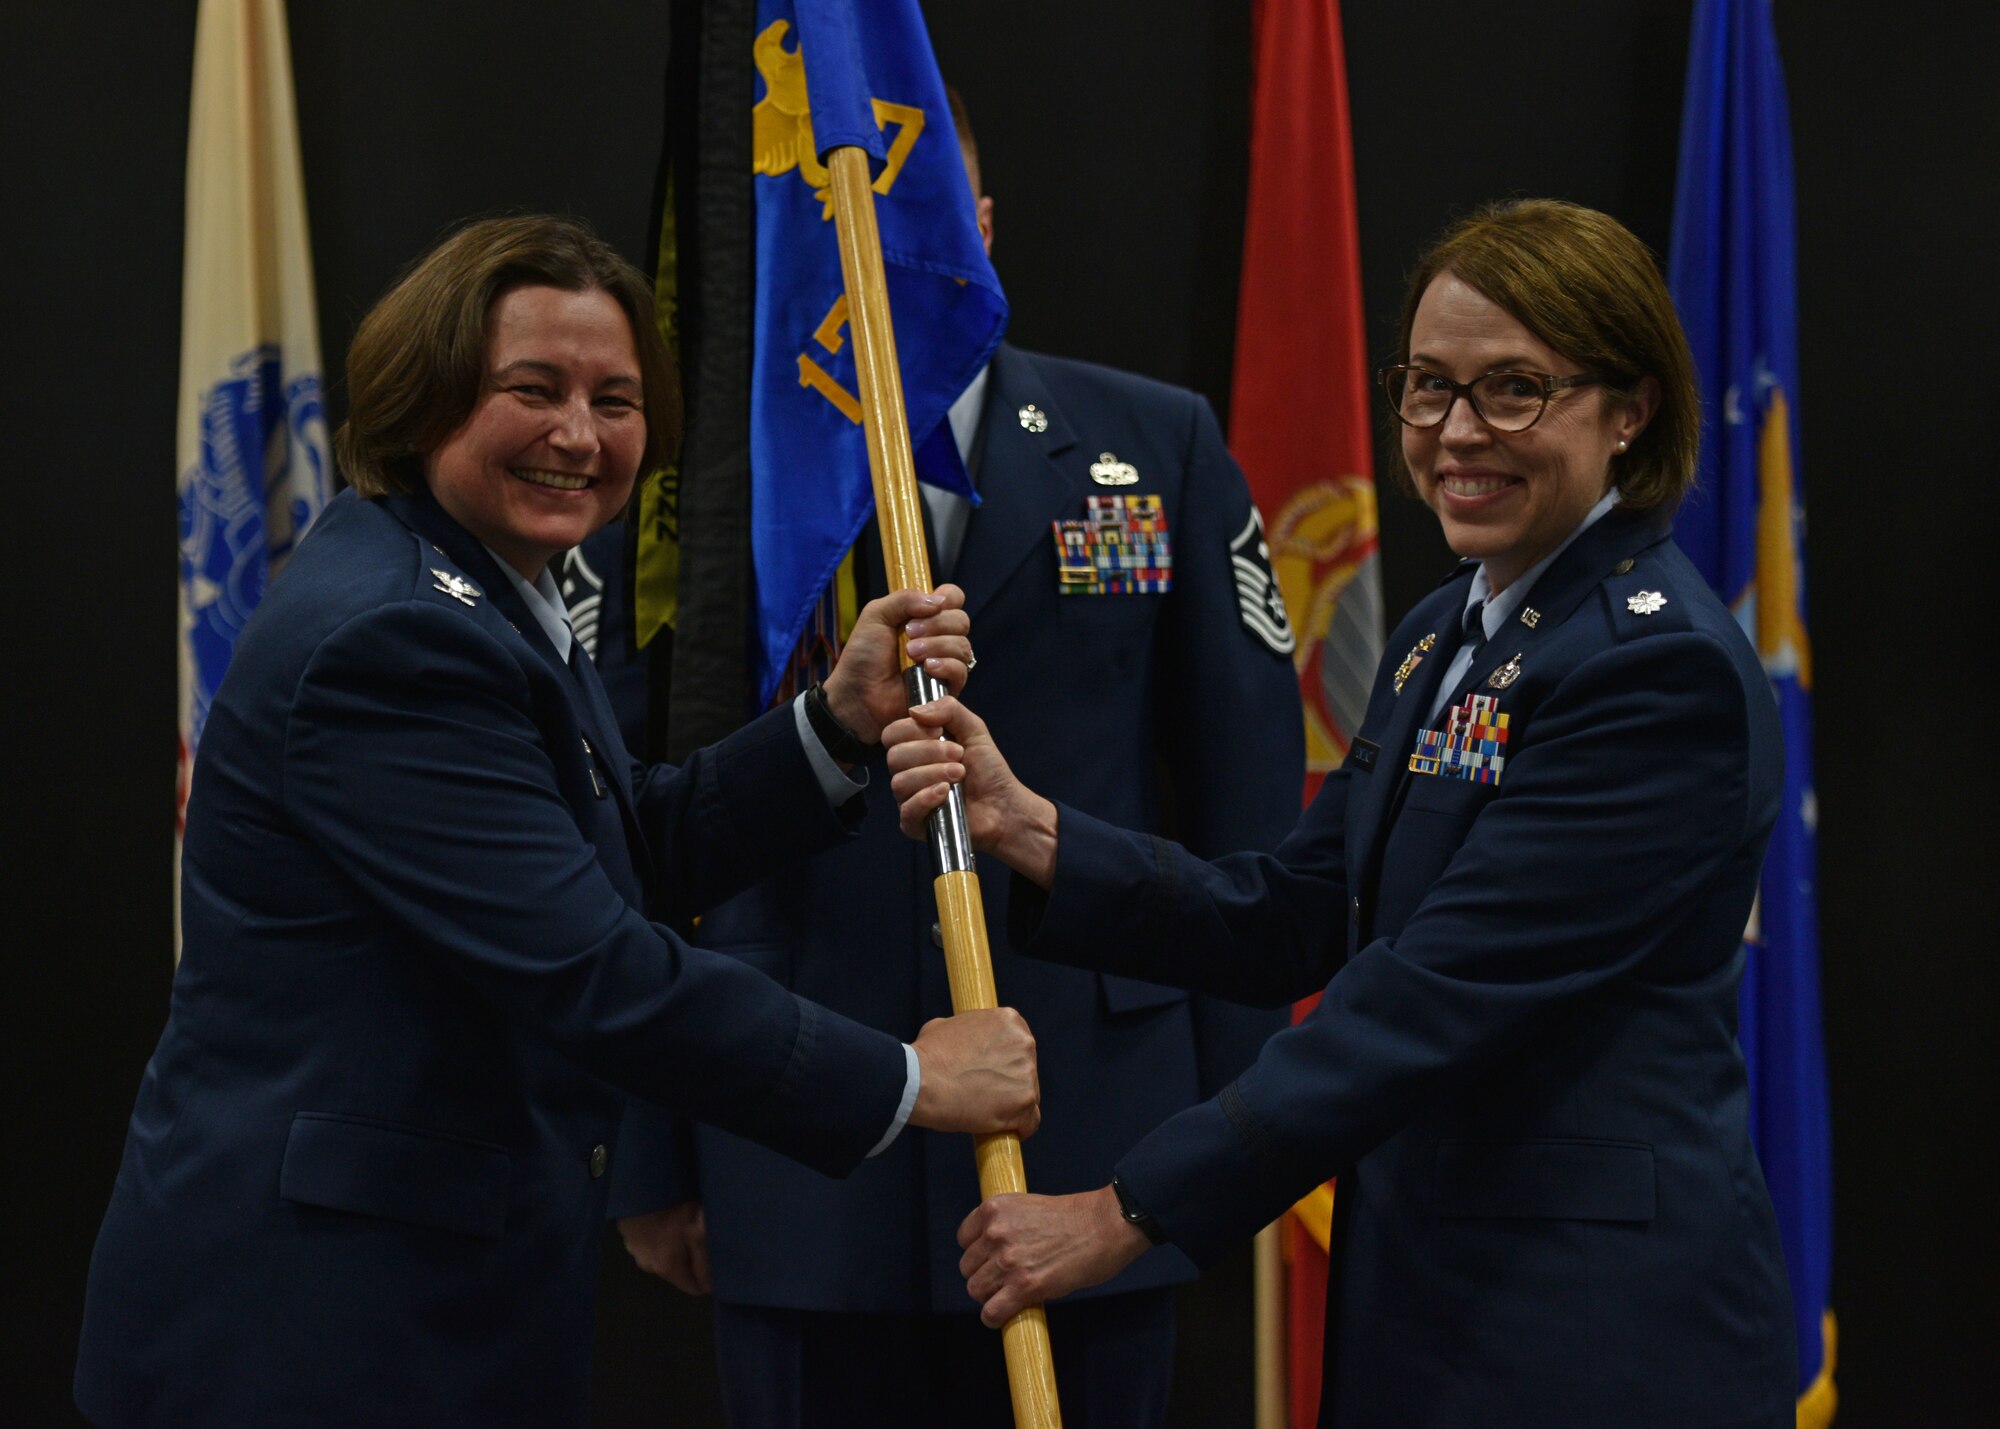 U.S. Air Force Lt. Col. Renee Fontenot, right, 17th Training Support Squadron incoming commander, assumes command from Col. Angelina Maguinness, 17th Training Group commander, during the 17th TRSS change of command ceremony at the Powell Event Center, Goodfellow Air Force Base, Texas, June 17, 2022. Change of commands are a military tradition representing the transfer of responsibilities from the outgoing commander to the incoming commander. (U.S. Air Force photo by Senior Airman Ashley Thrash)